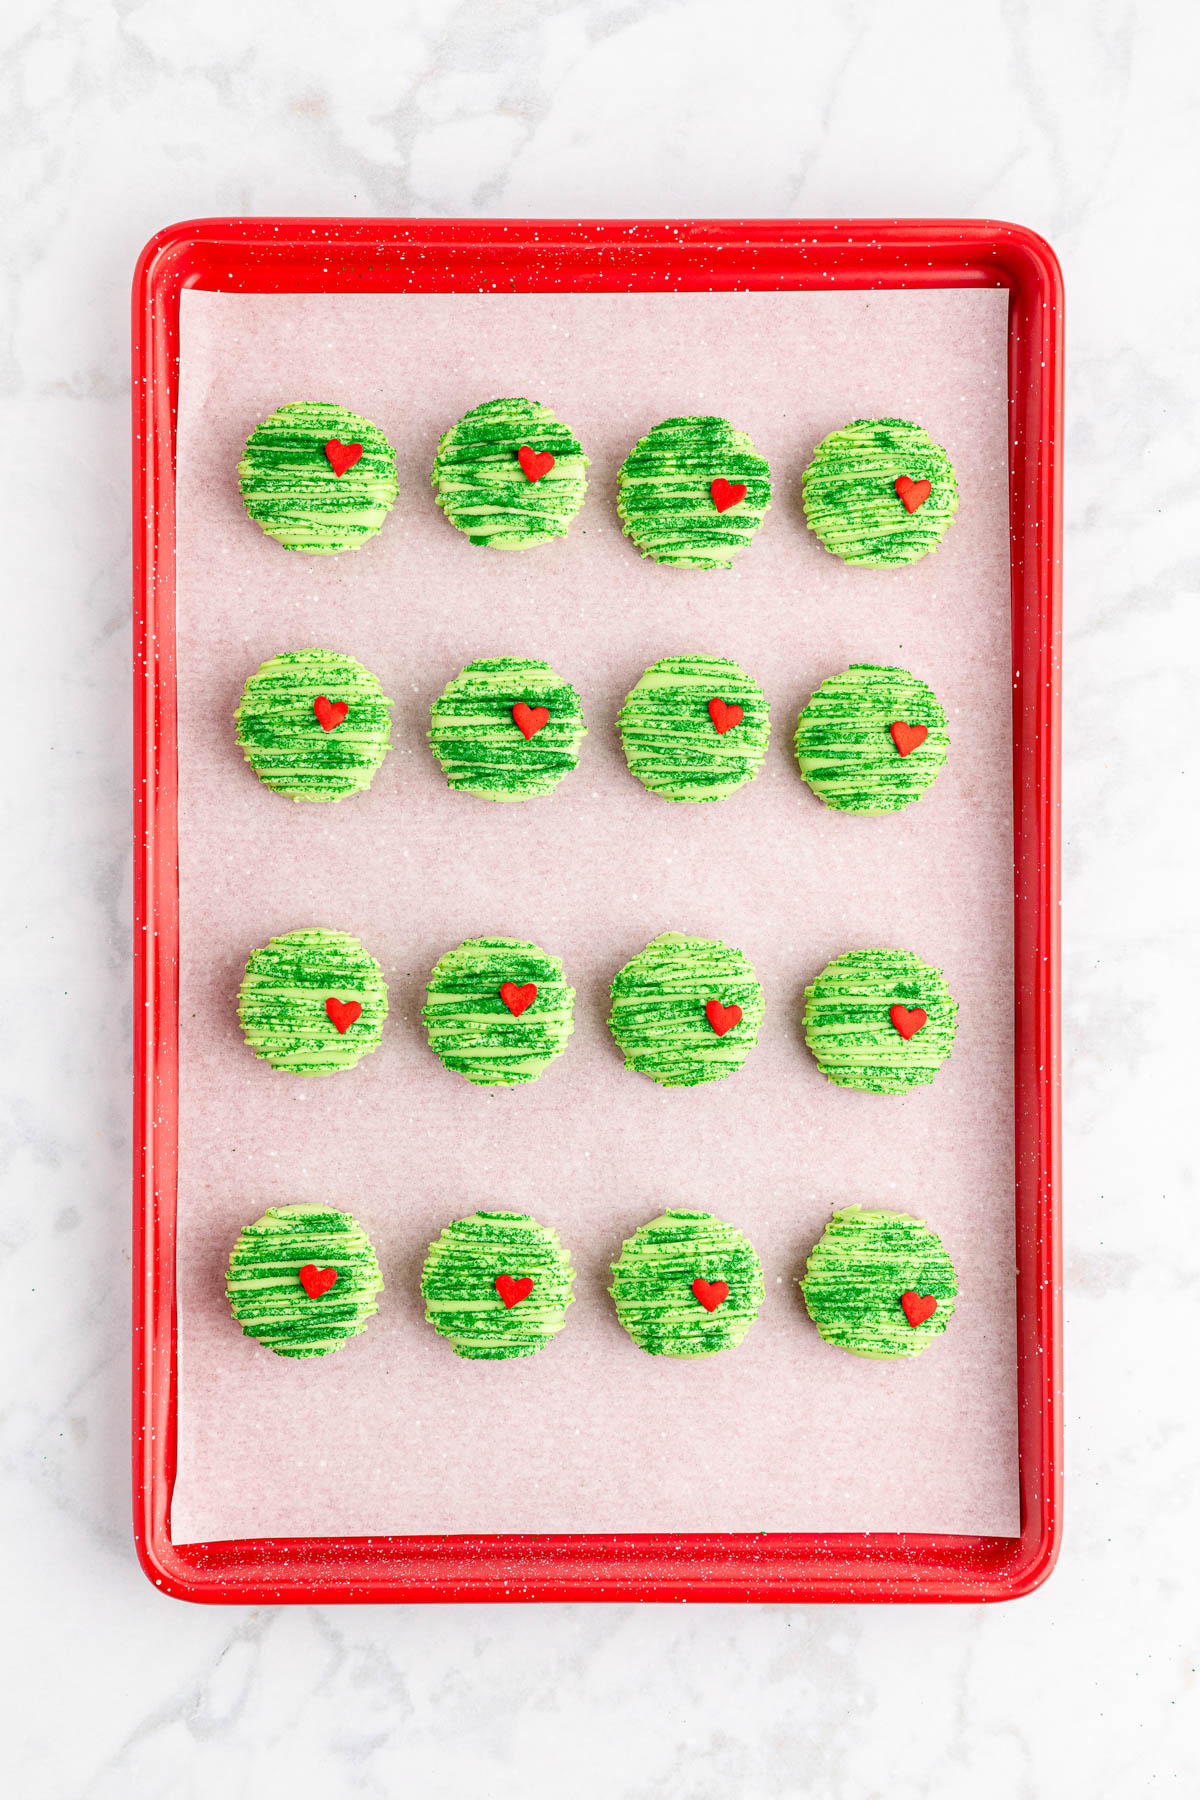 Grinch cookies on a red tray.